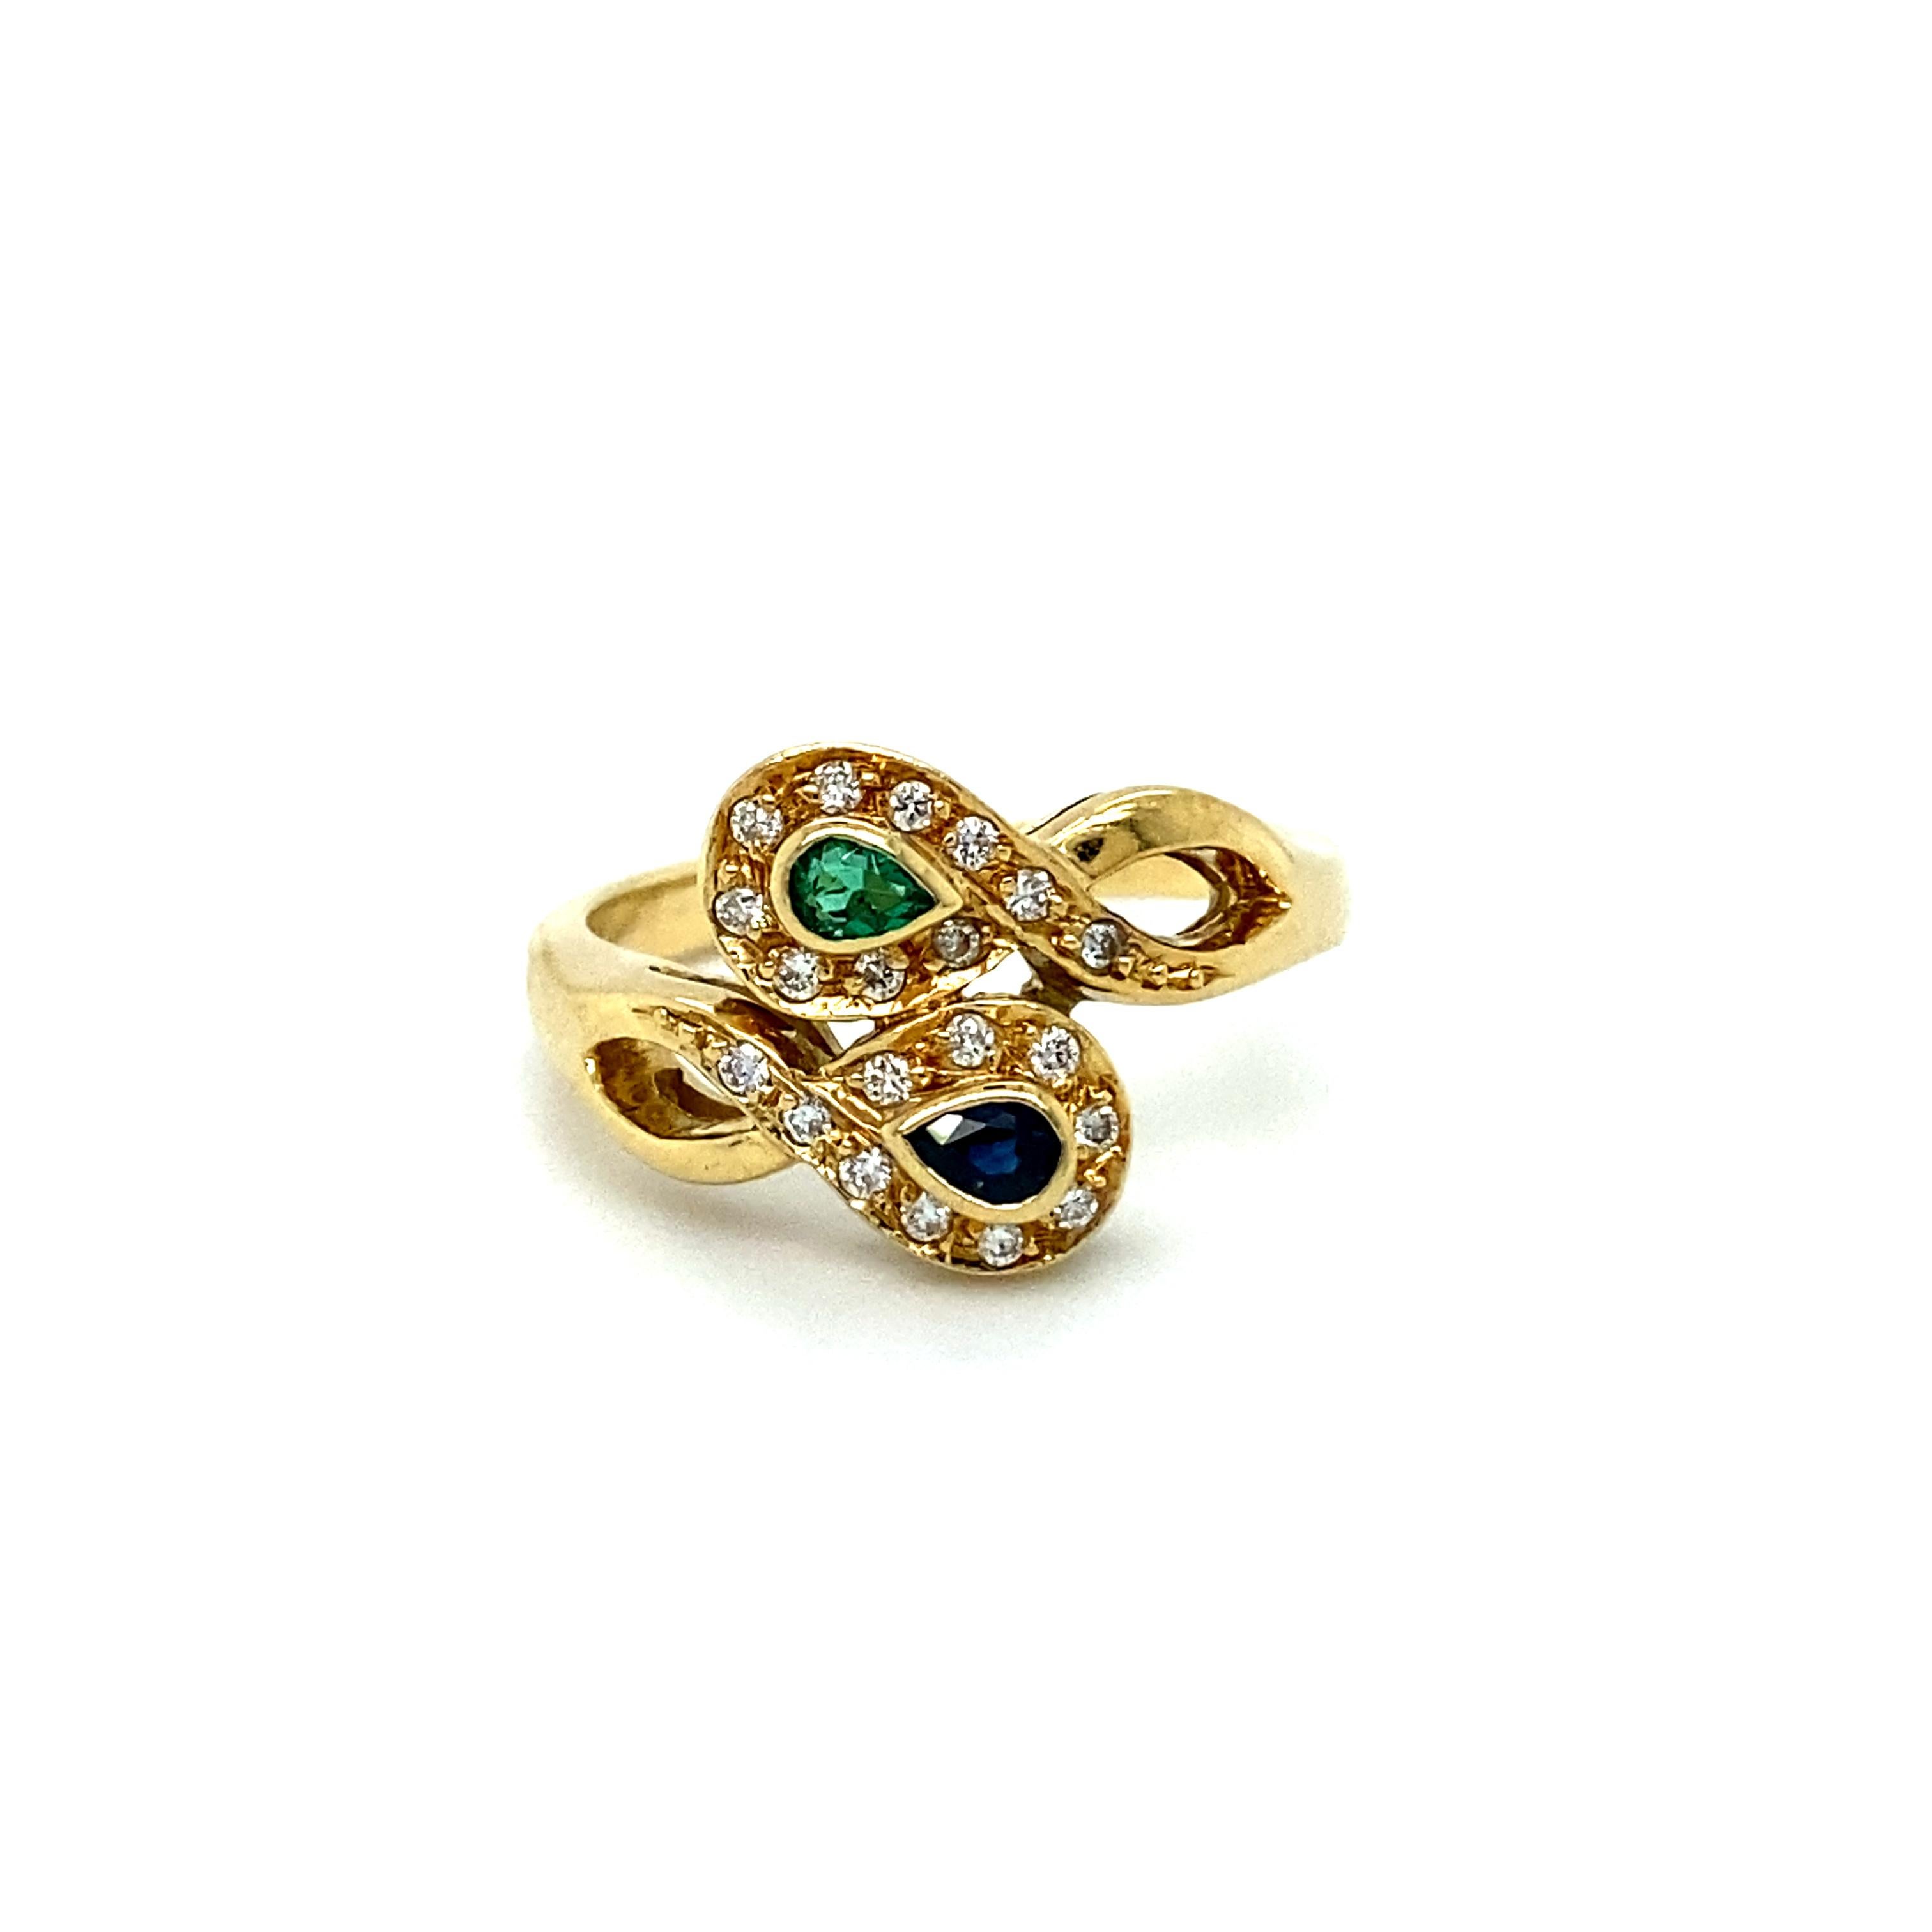 This gorgeous Vintage Emerald, Sapphire, and Diamond Ring truly is a special piece, made by a special maker - H. Stern! Crafted in 18K Yellow Gold, the design is a lovely swirly by pass design, with a Pear Cut Emerald and Sapphire opposite,